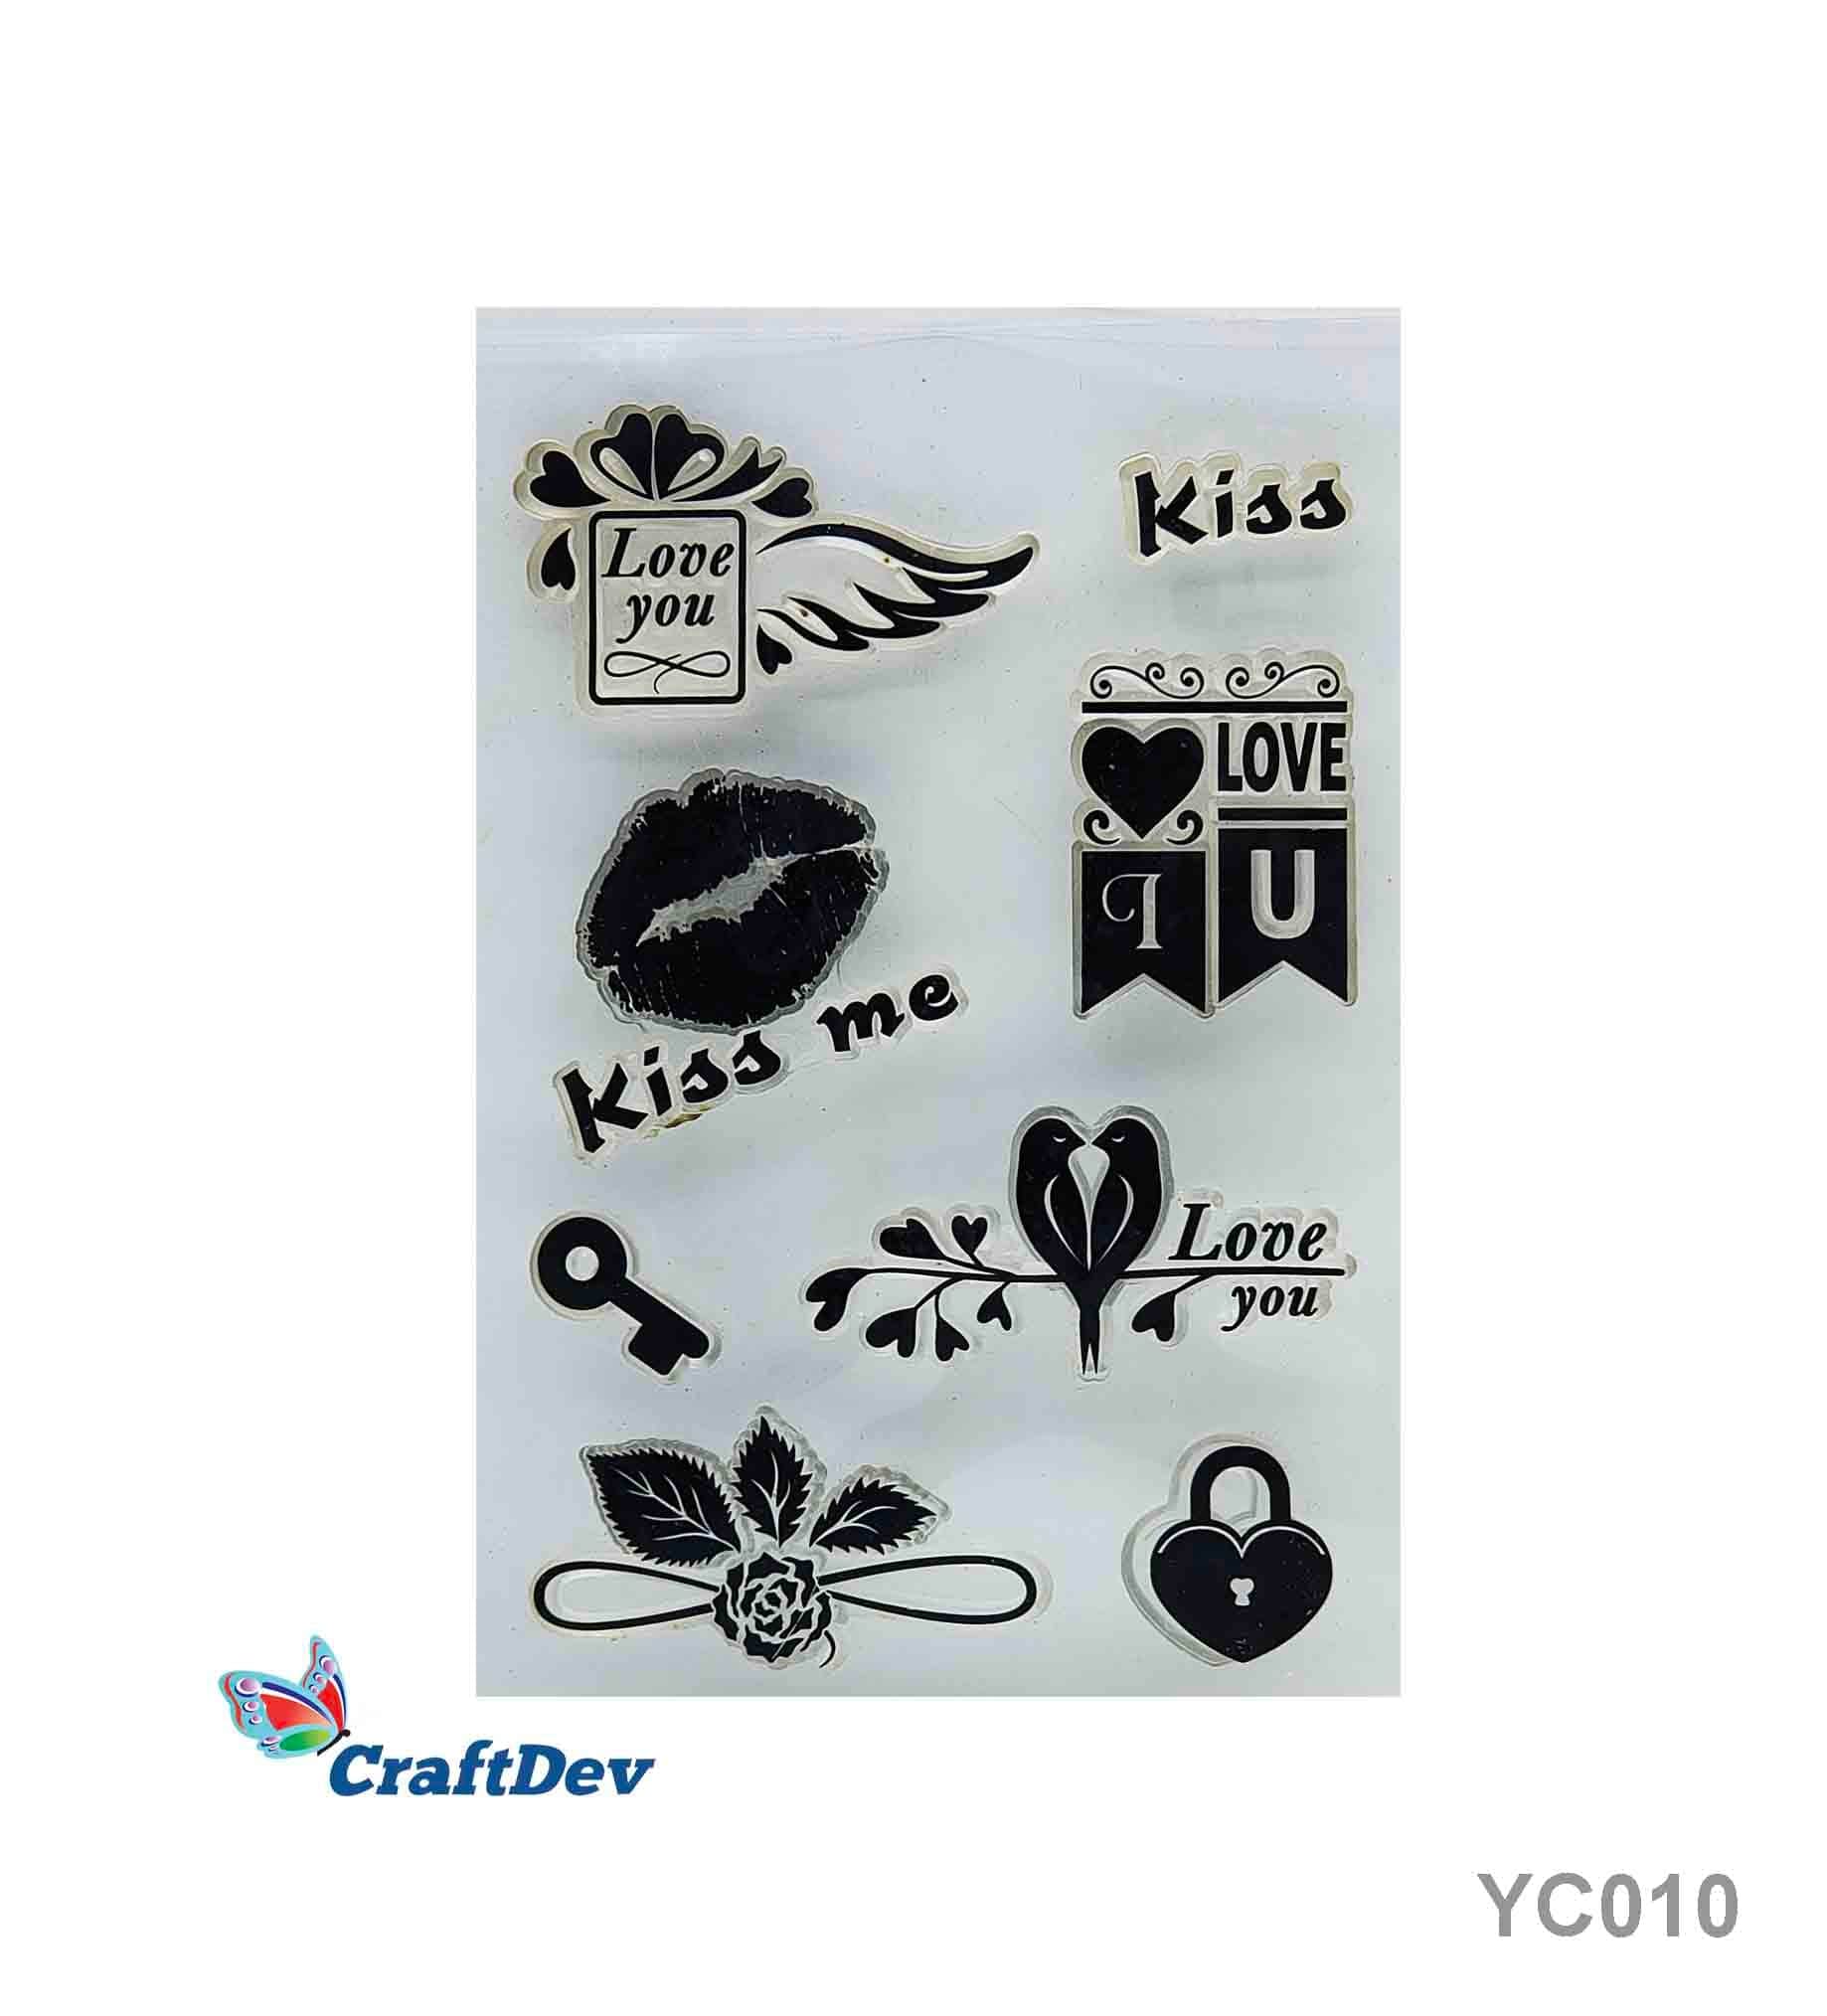 MG Traders 1 Clear Transparent Stamps Clear Stamp Small (Yc010)